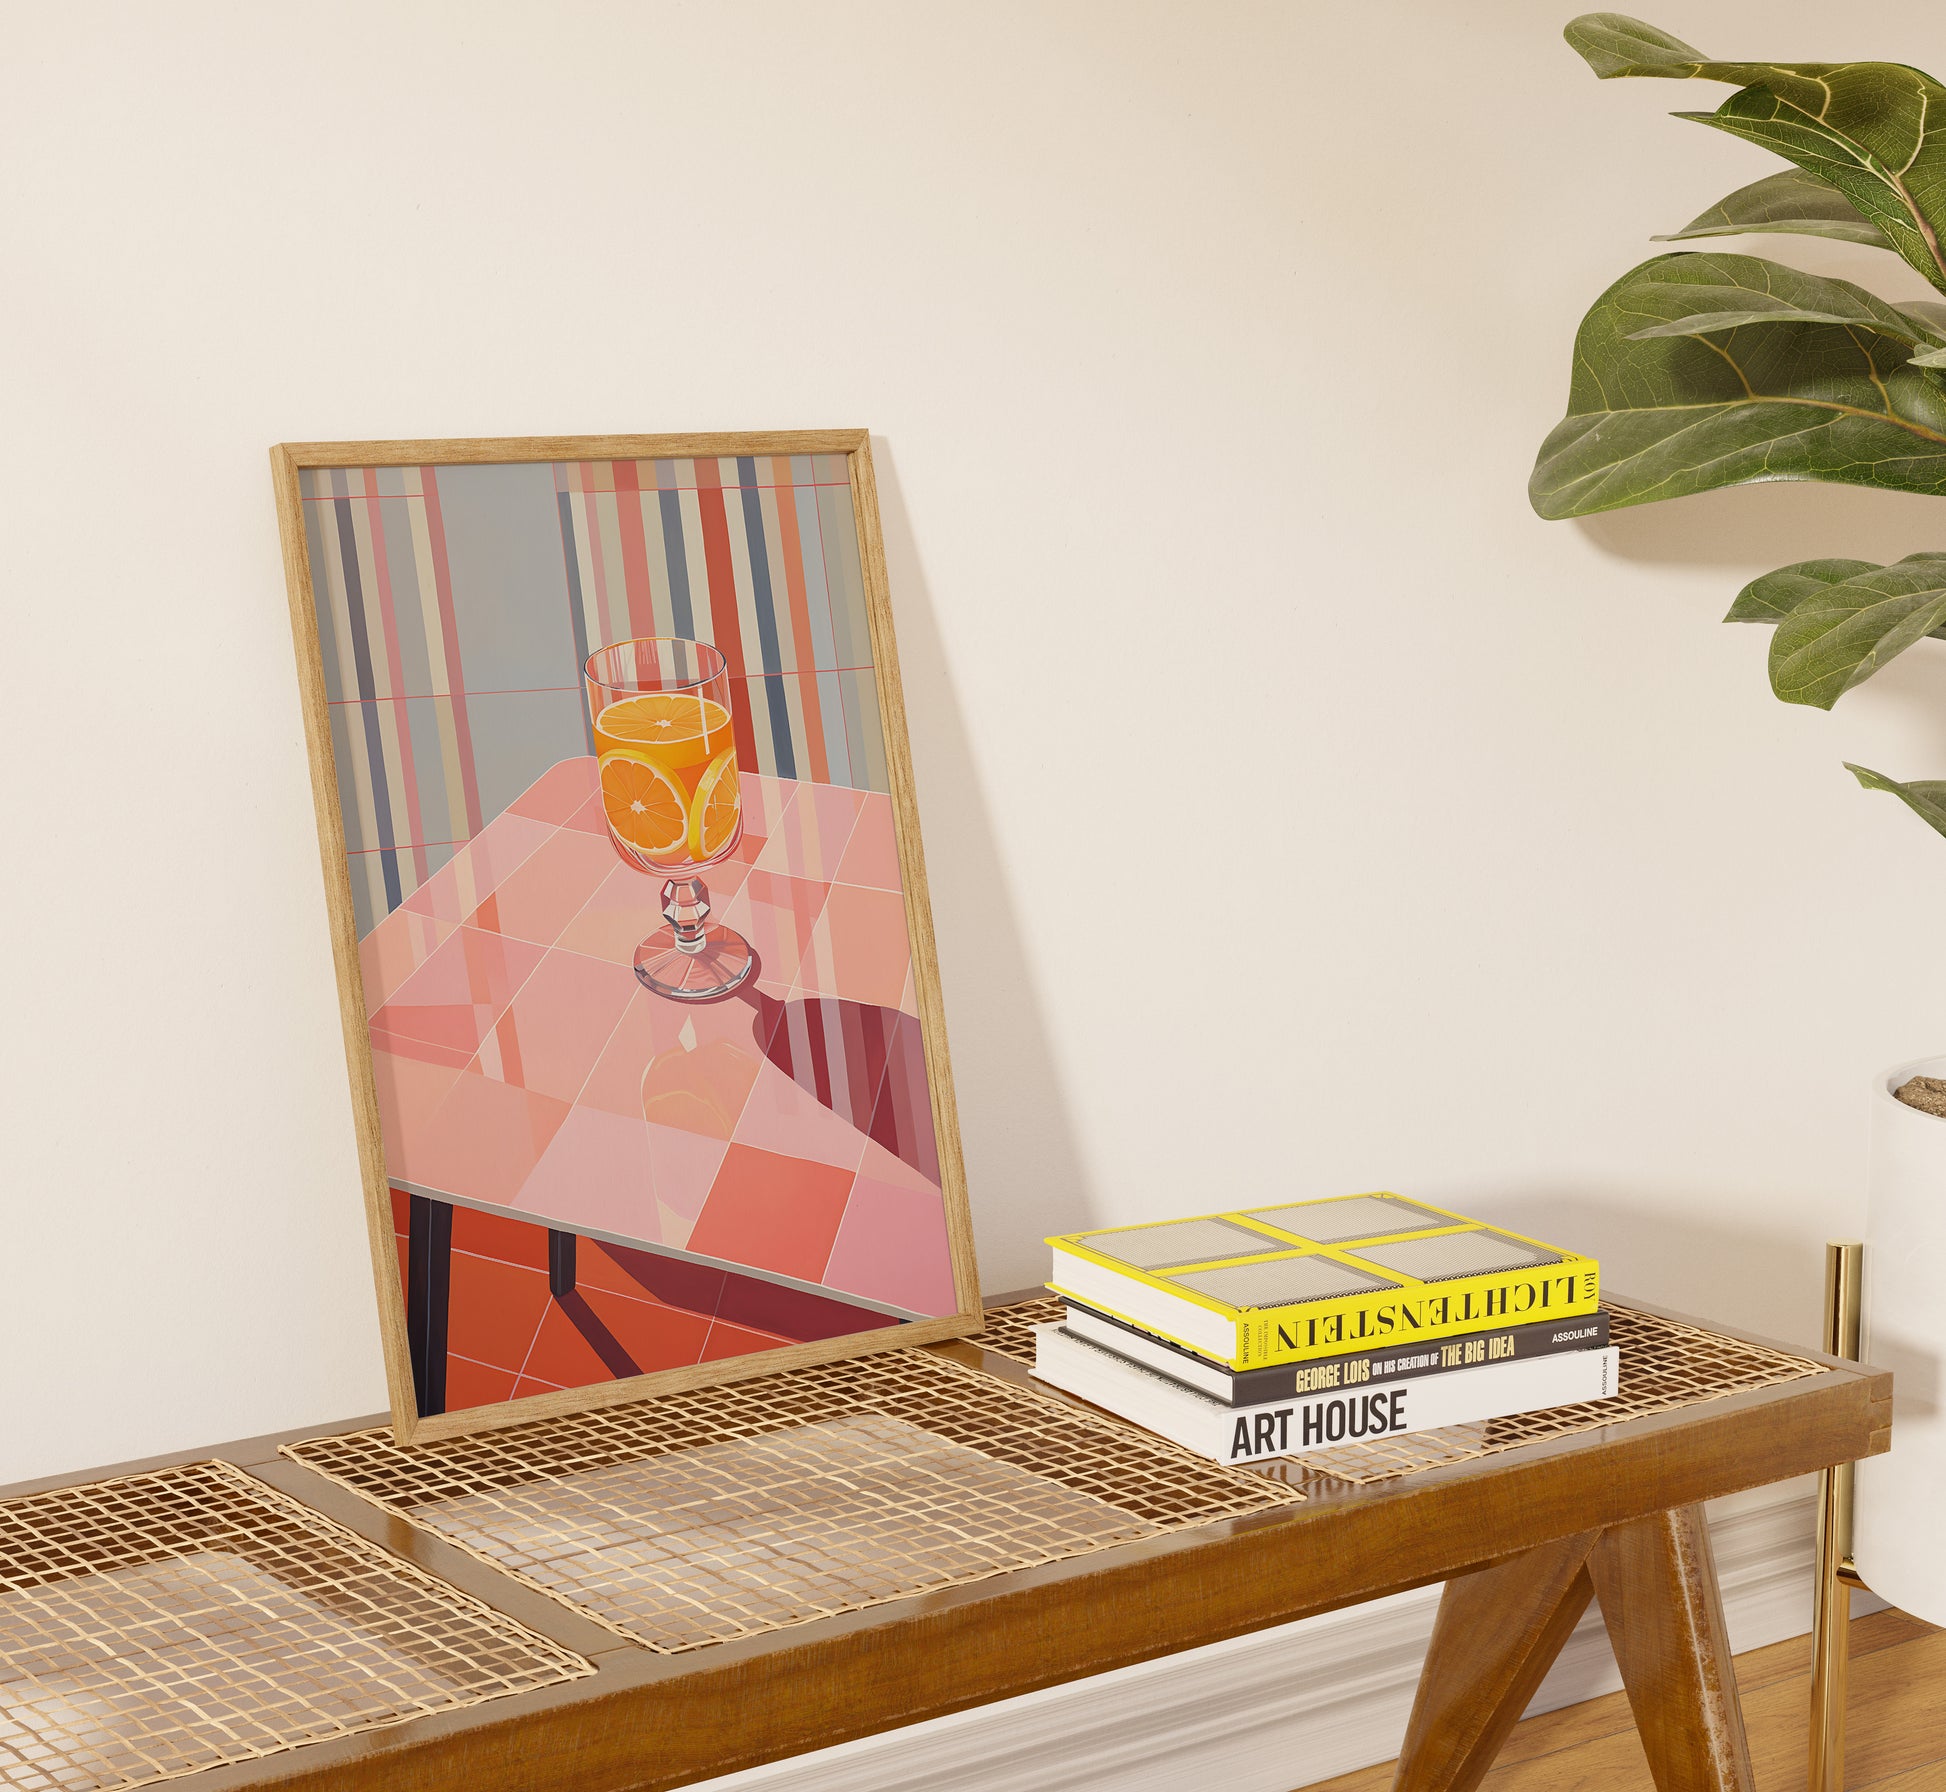 A framed geometric art piece on a console table with books and a leafy plant beside it.